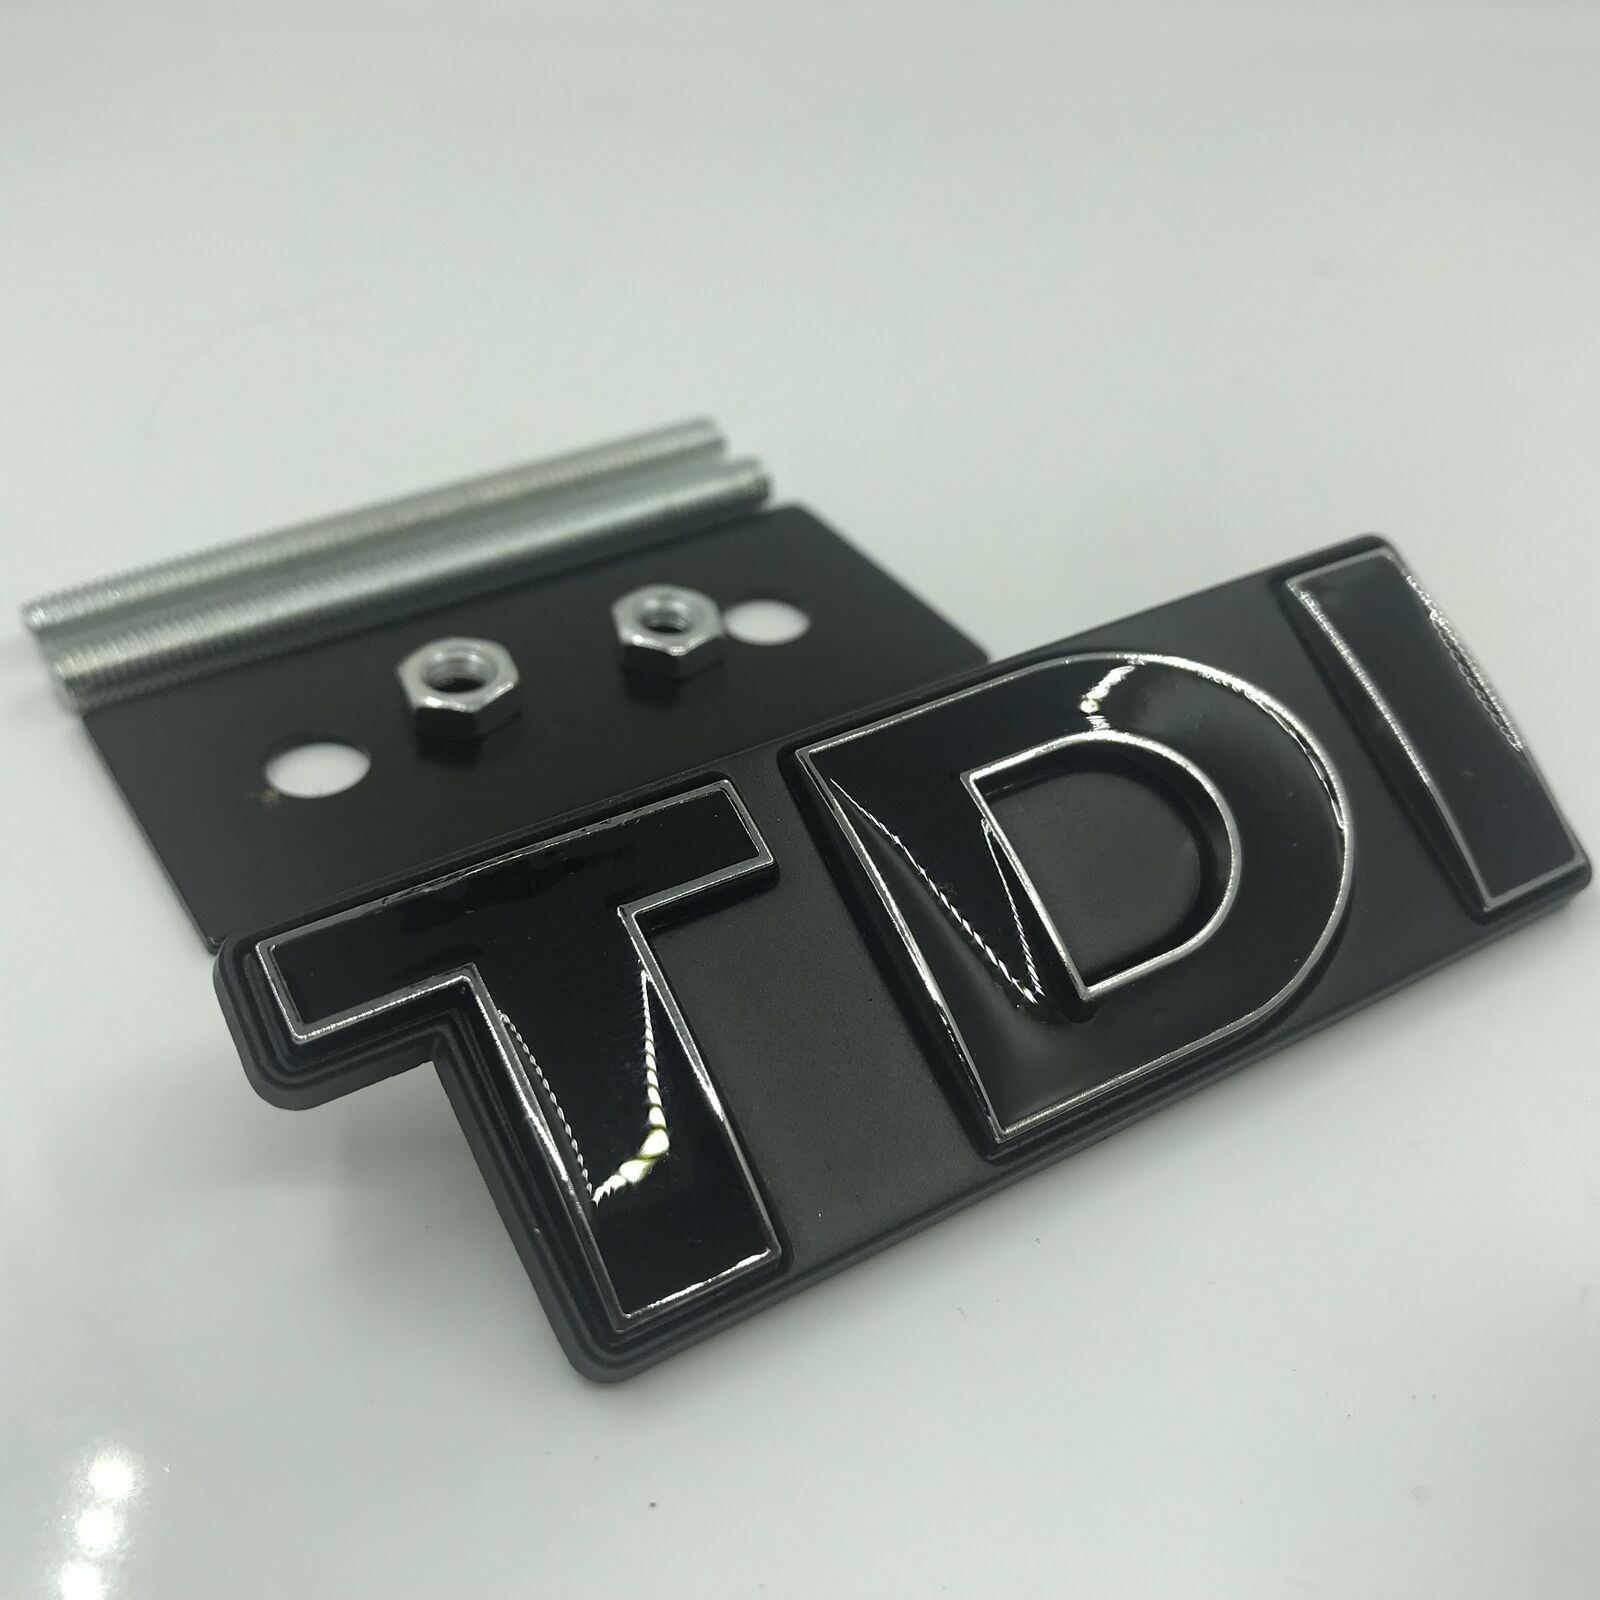 Black TDI Front Grill Grille Emblem Badge Decal for Golf Jetta Polo MK Scirocco